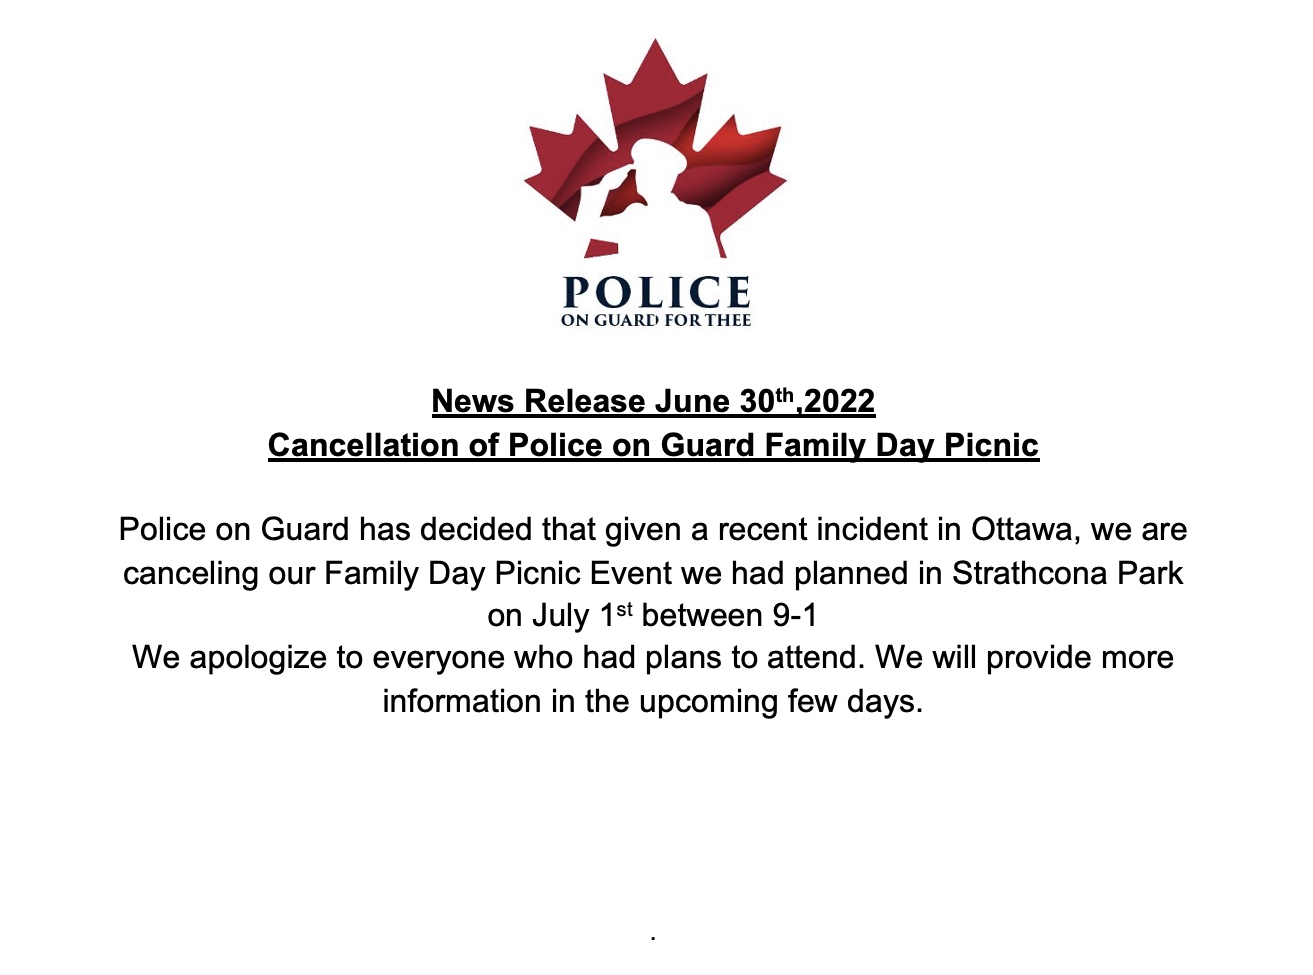 Cancellation of our Family Day Picnic in Strathcona Park